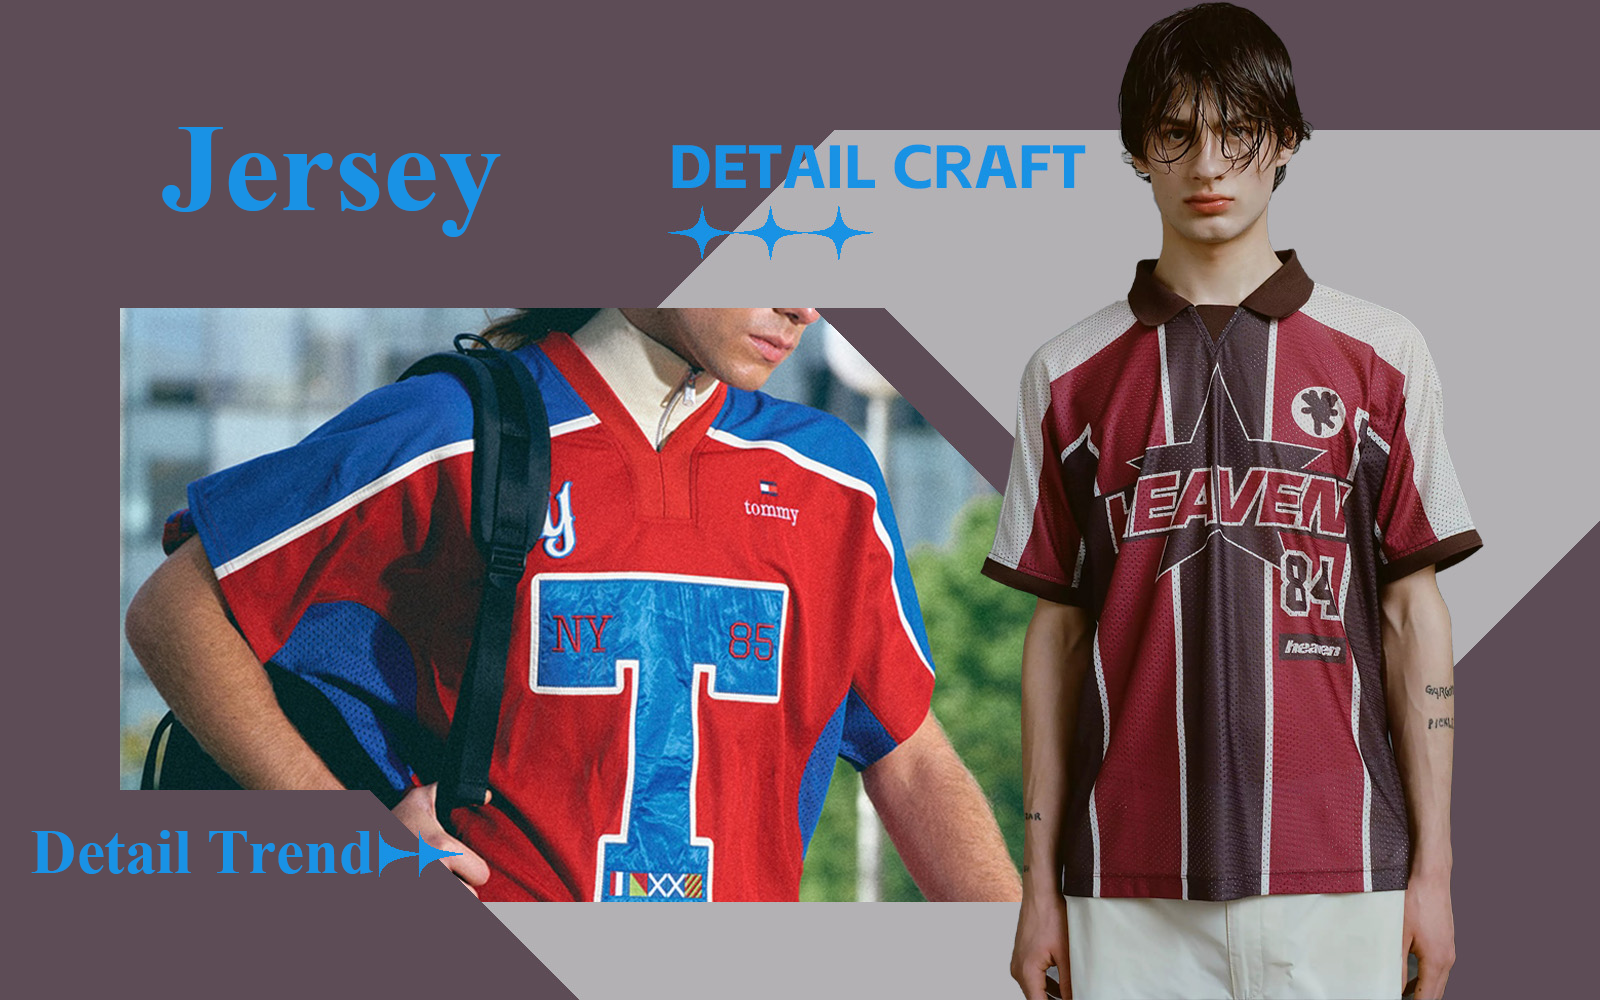 The Detail & Craft Trend for Jersey